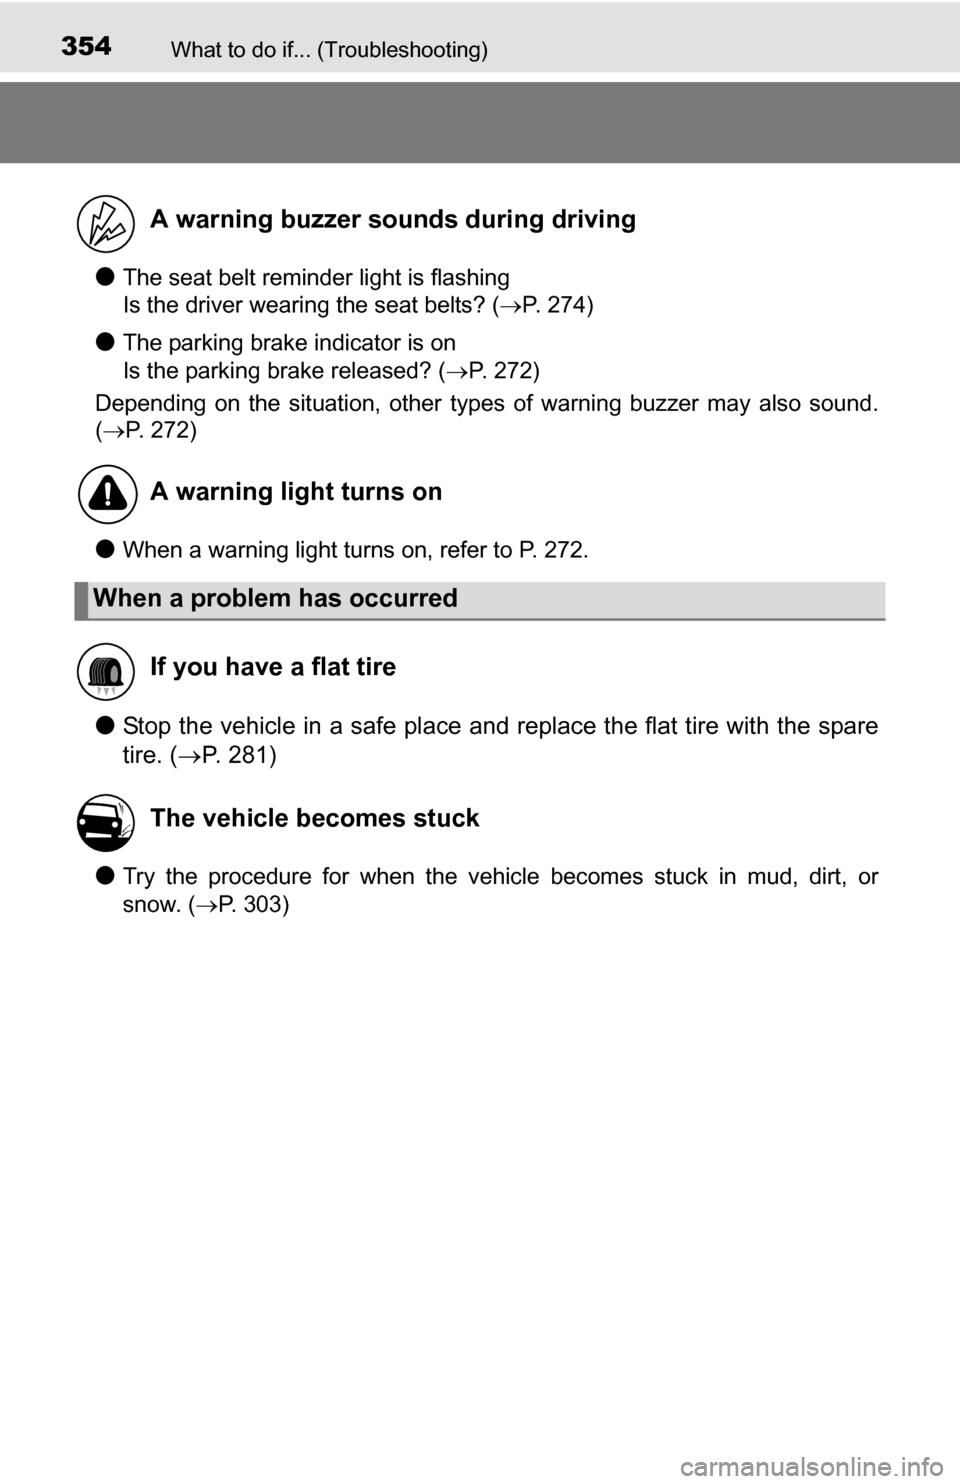 TOYOTA YARIS 2016 3.G Owners Manual 354What to do if... (Troubleshooting)
●The seat belt reminder light is flashing 
Is the driver wearing the seat belts? (P. 274)
●The parking brake indicator is on 
Is the parking brake released